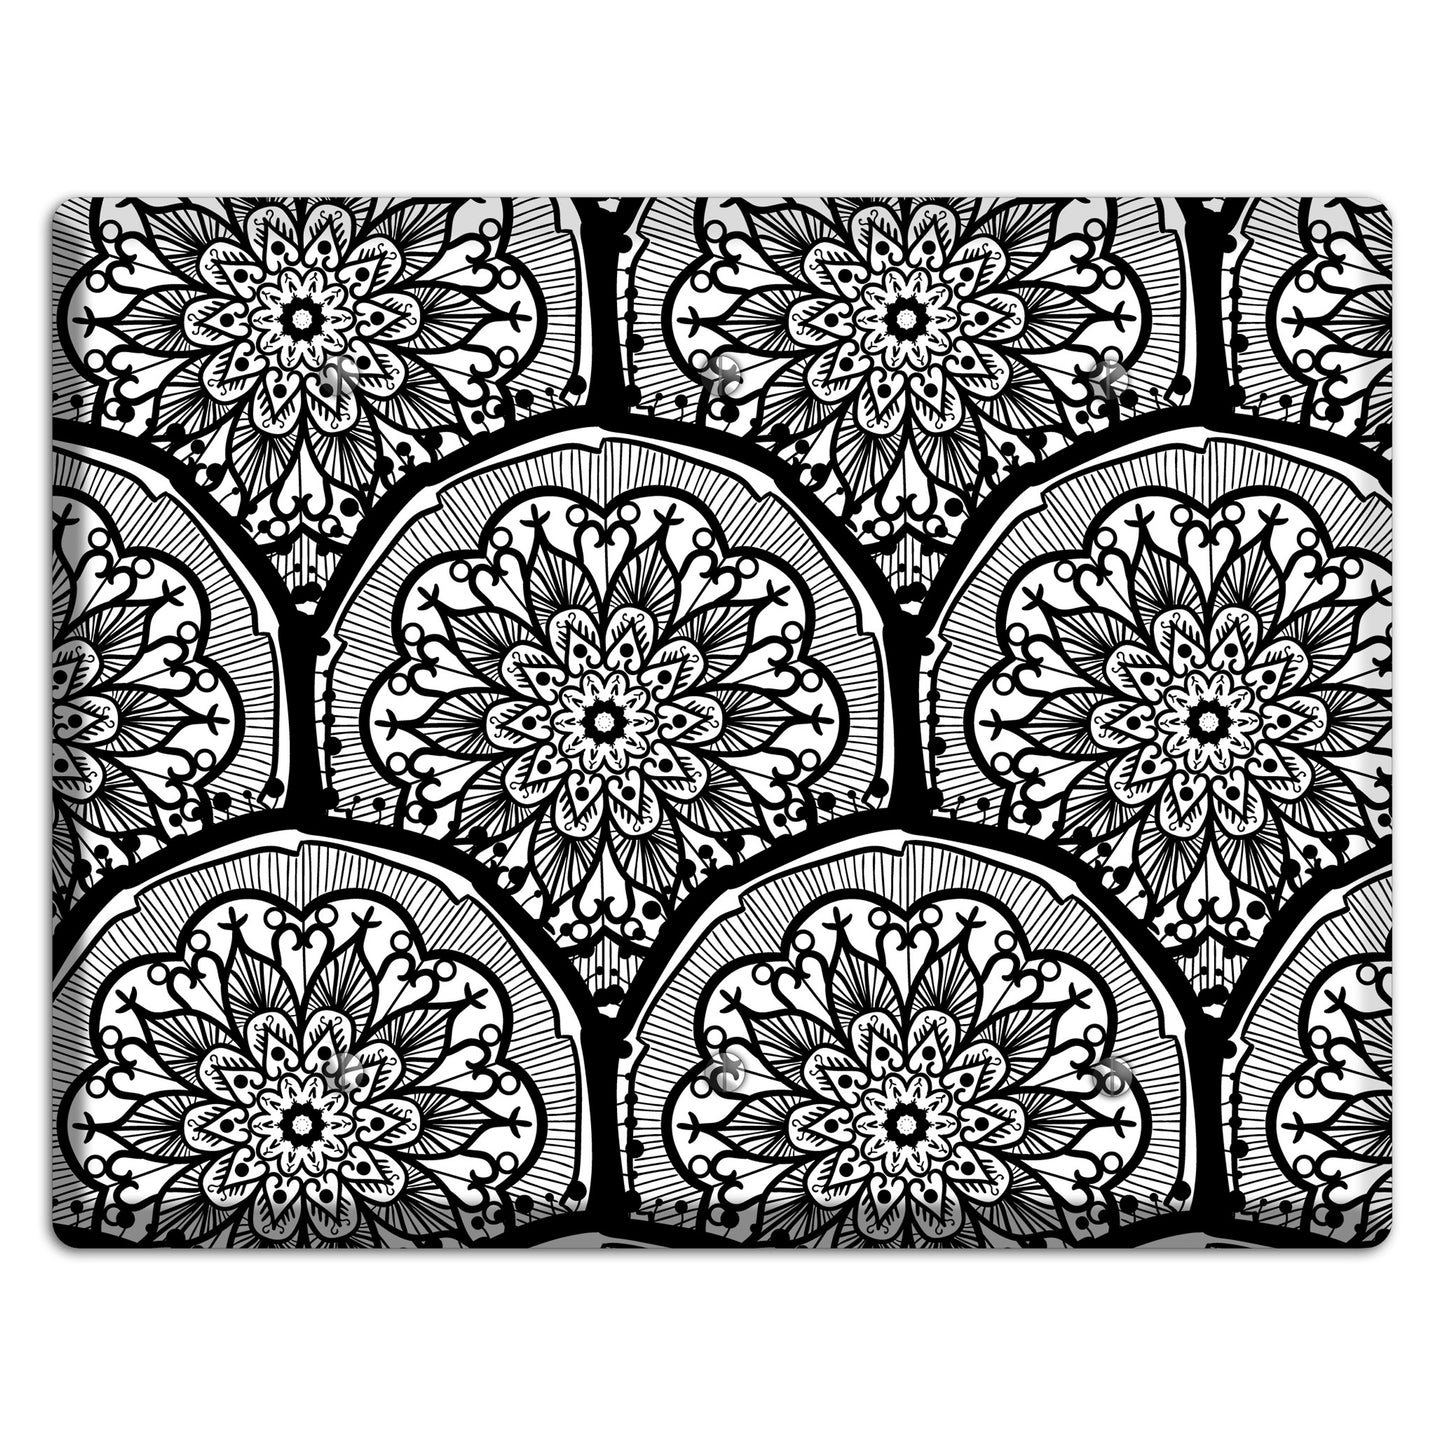 Mandala Black and White Style A Cover Plates 3 Blank Wallplate